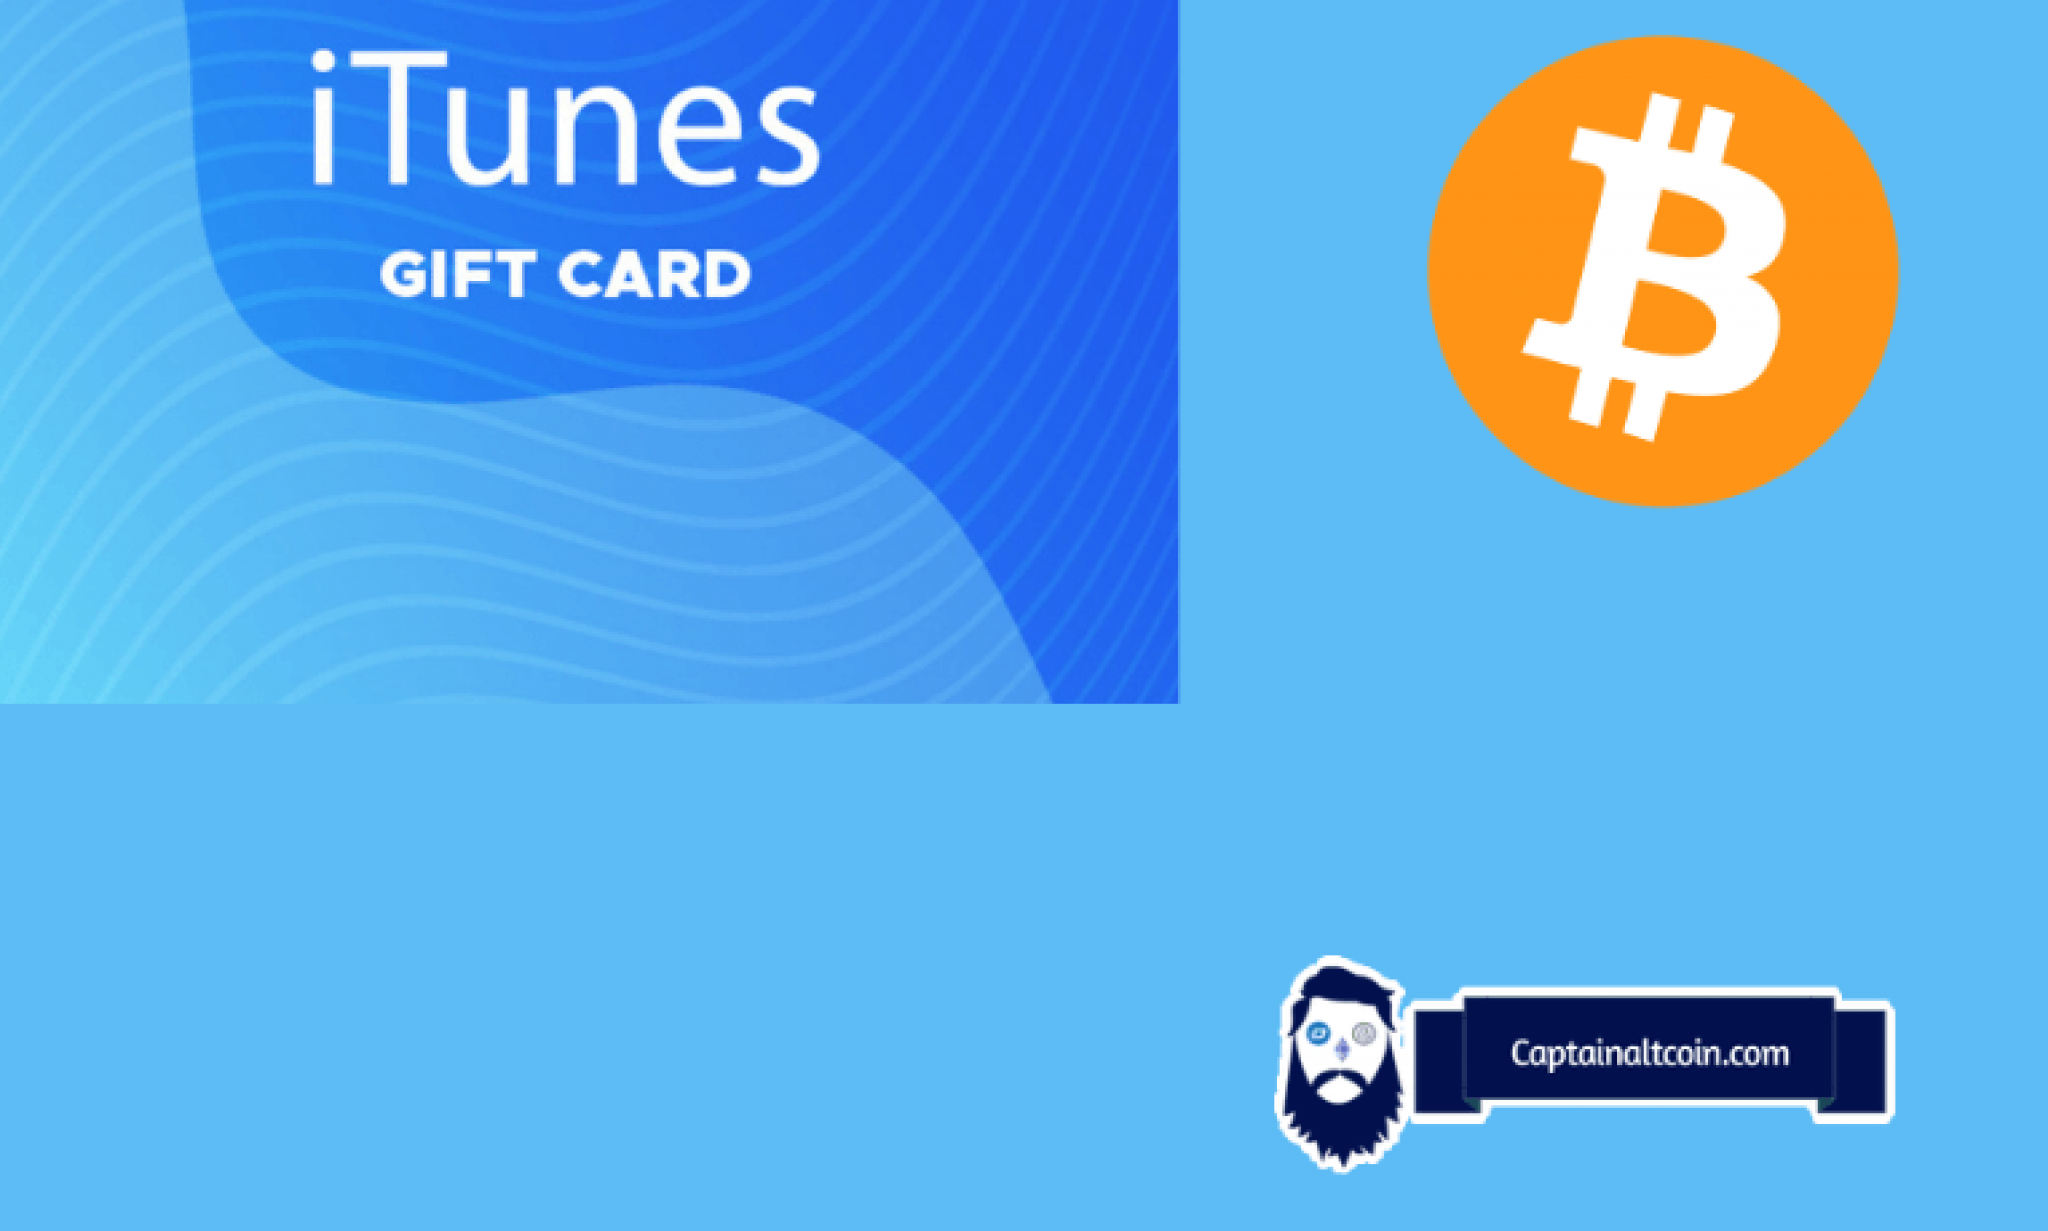 buy us itunes gift card with bitcoin